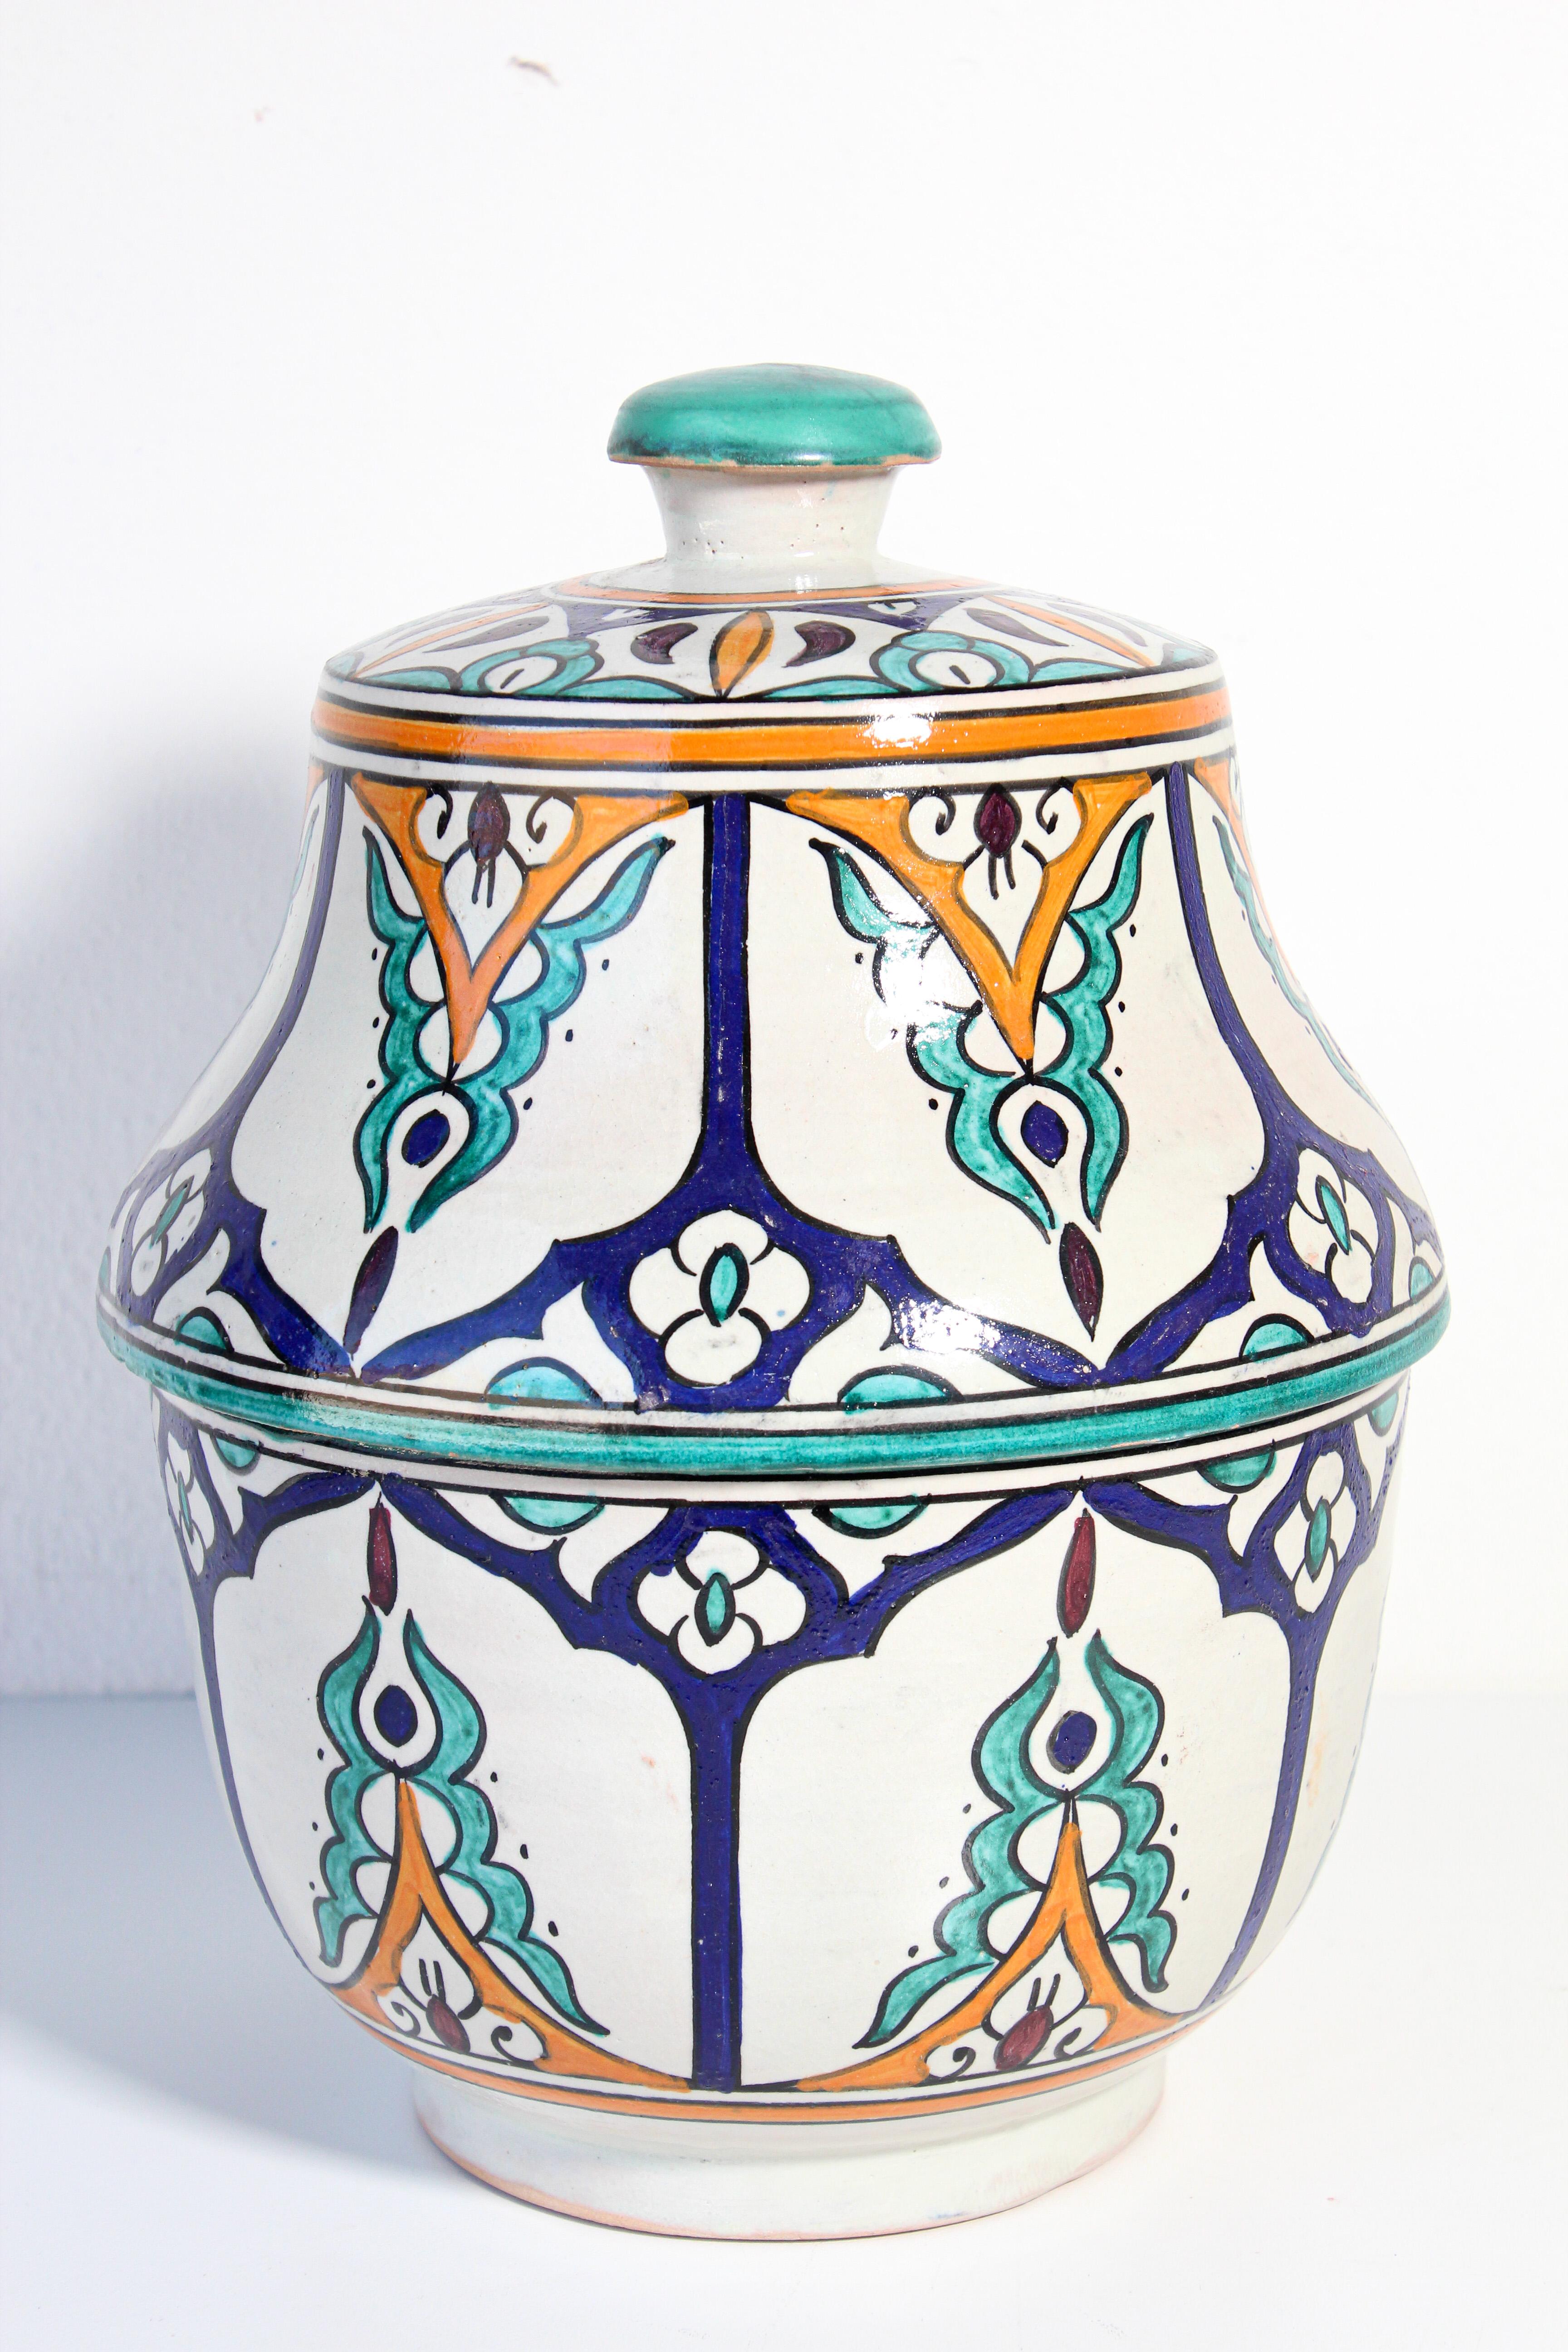 Moroccan Moorish Ceramic Glazed Covered Jars Handcrafted in Fez Morocco For Sale